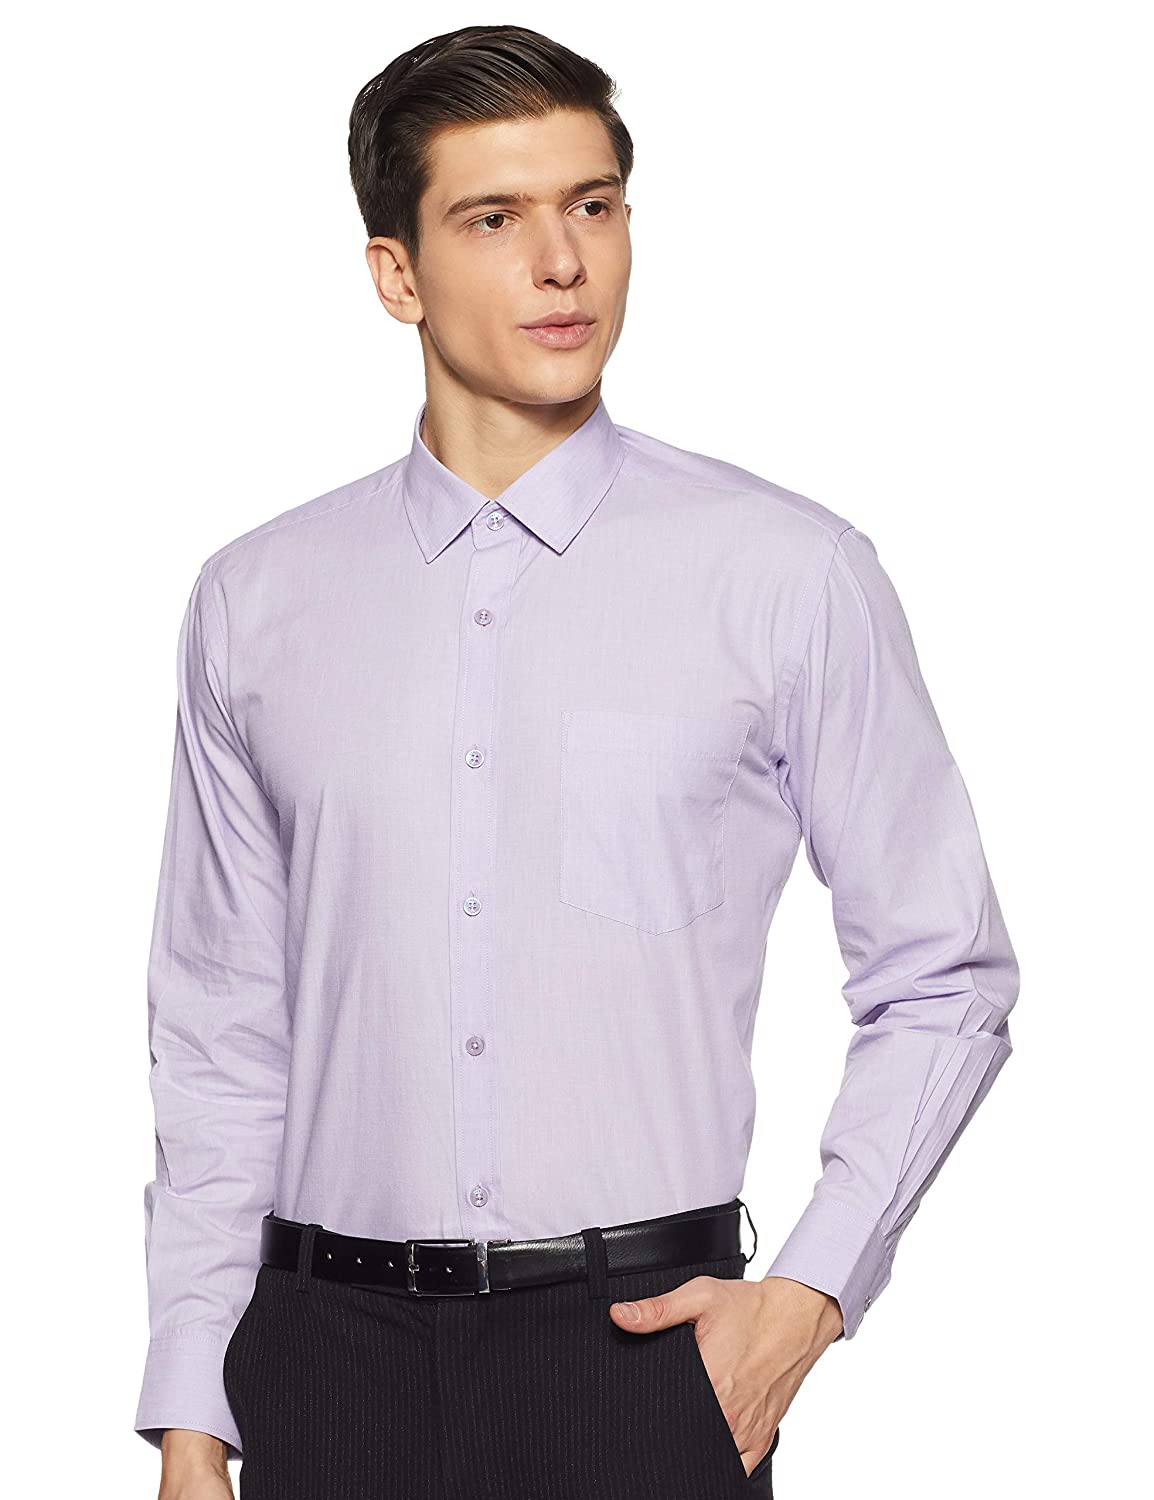 Purple / S Men's Regular Fit Formal Long Sleeve Casual Business Party Dress Shirts with Chest Pocket The Orange Tags